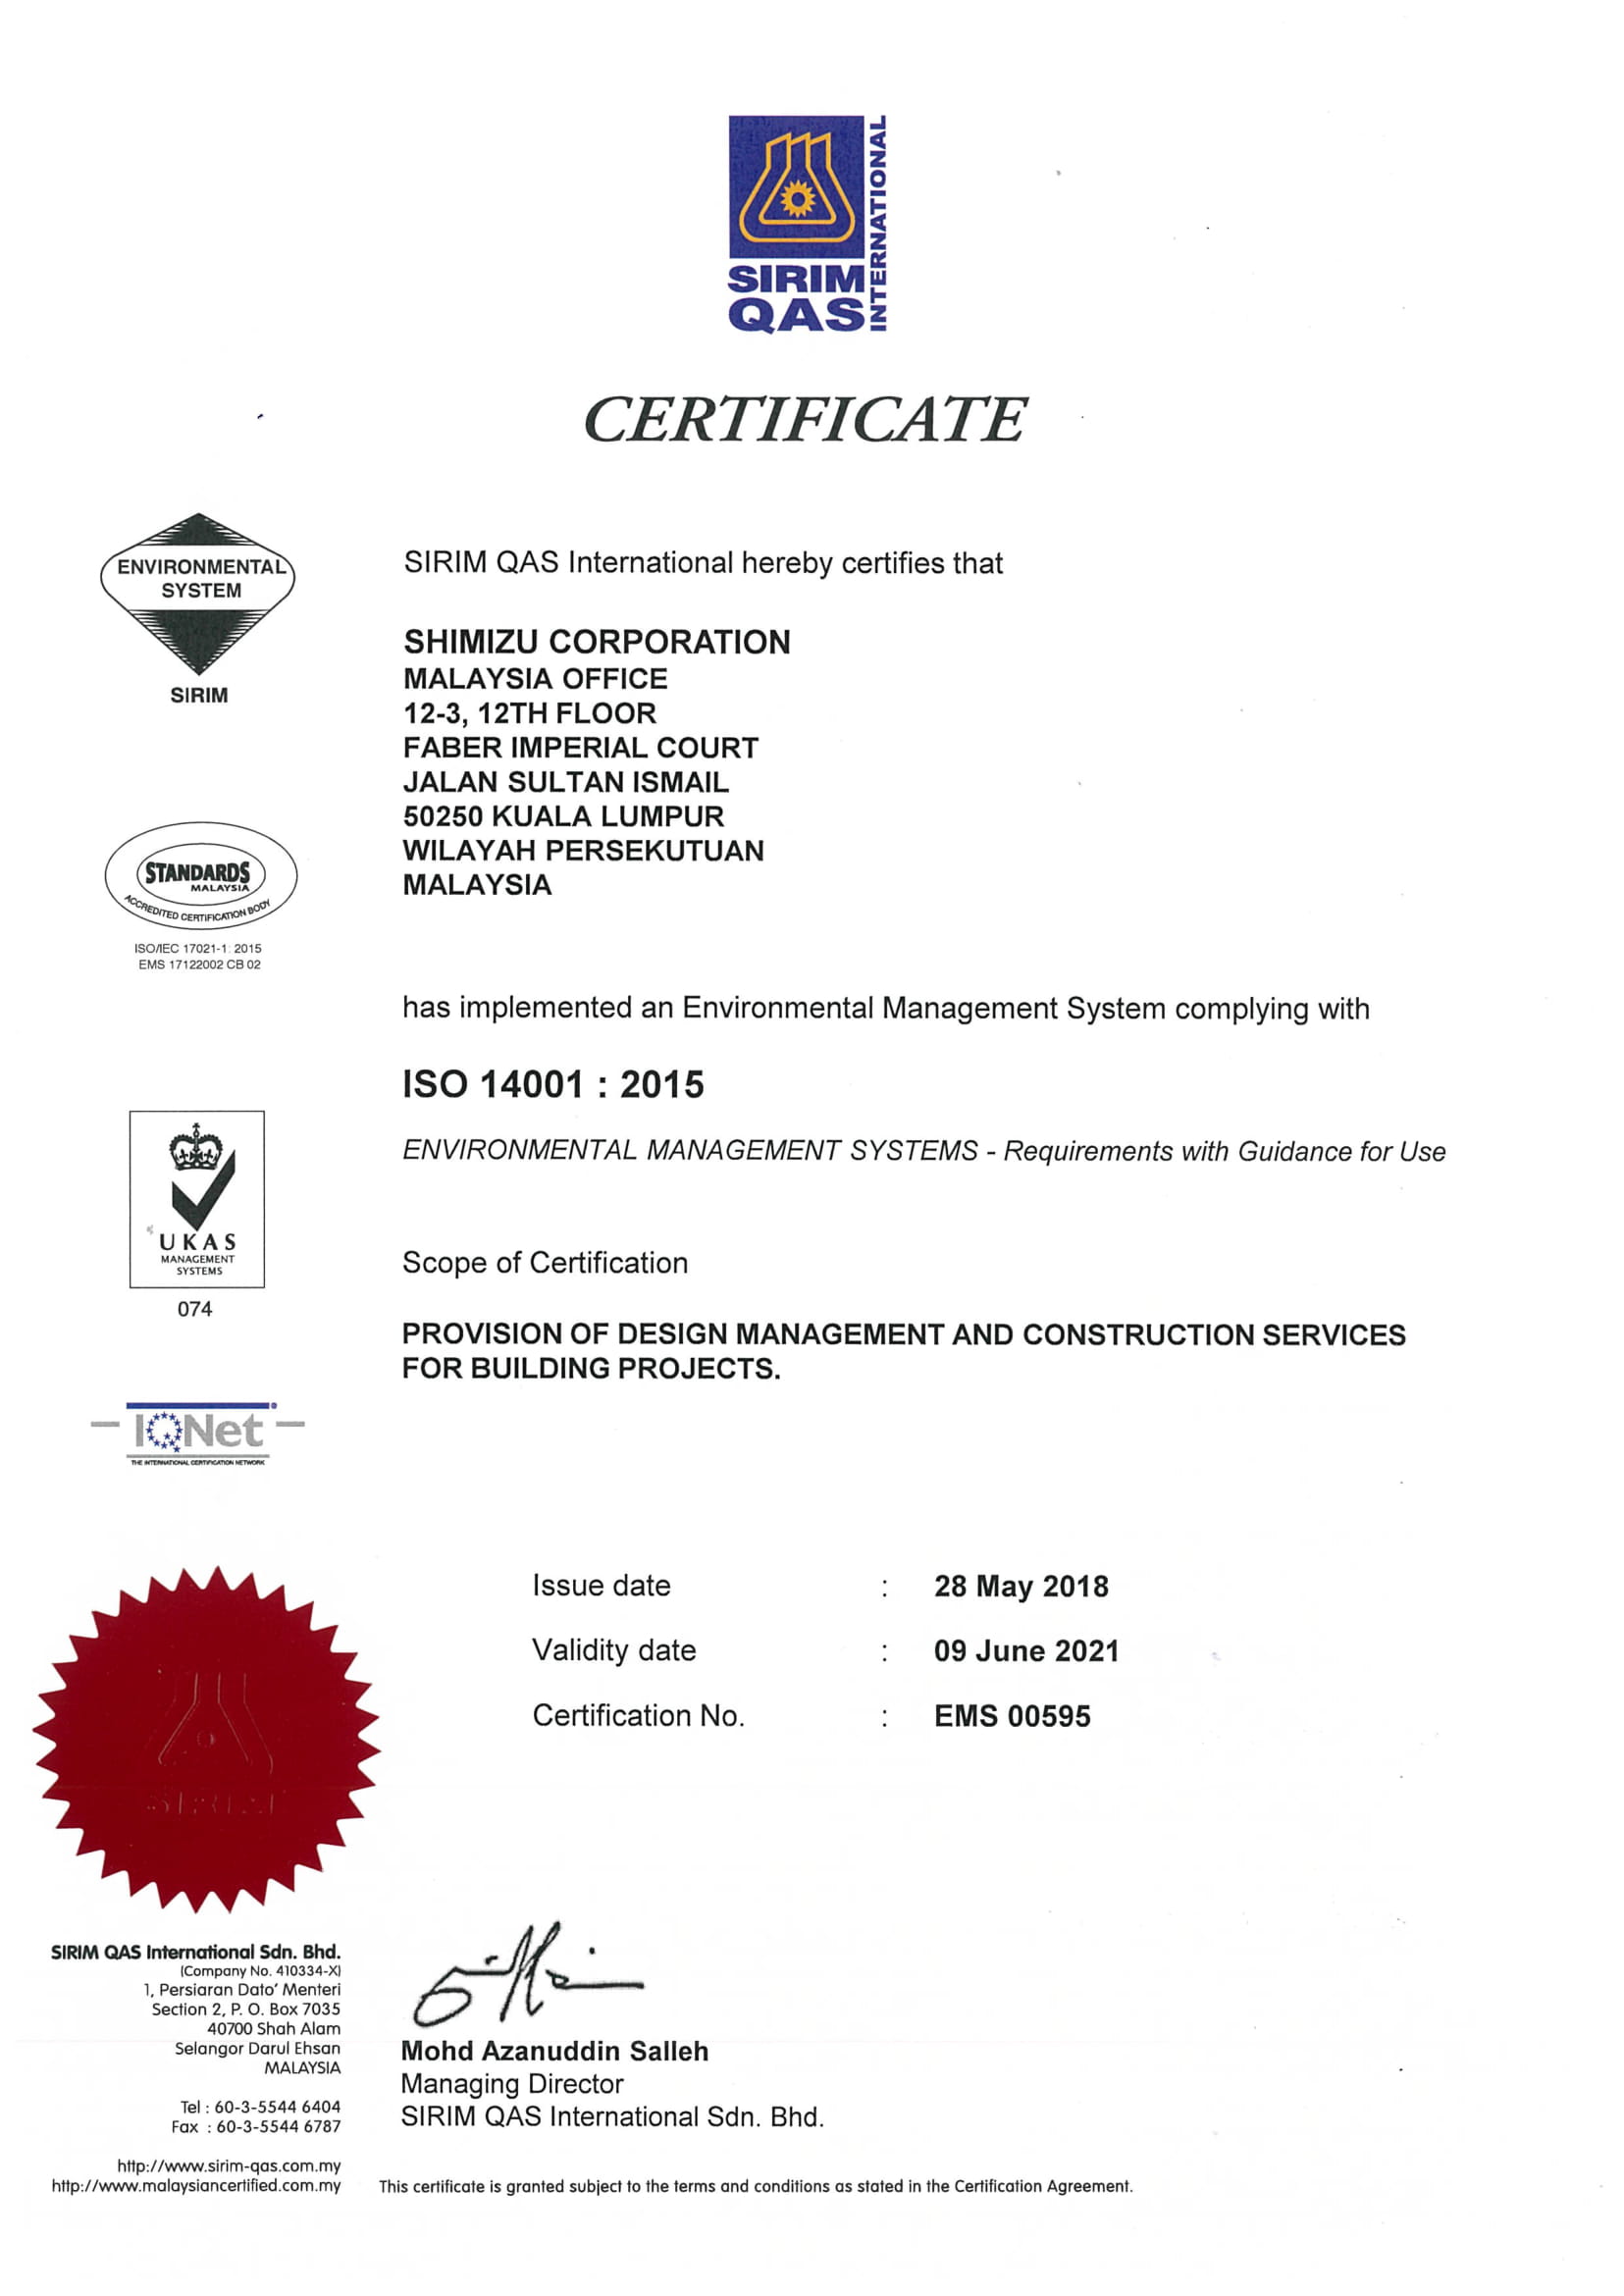 Certified ISO14001:2015 & IQNET by SIRIM QAS